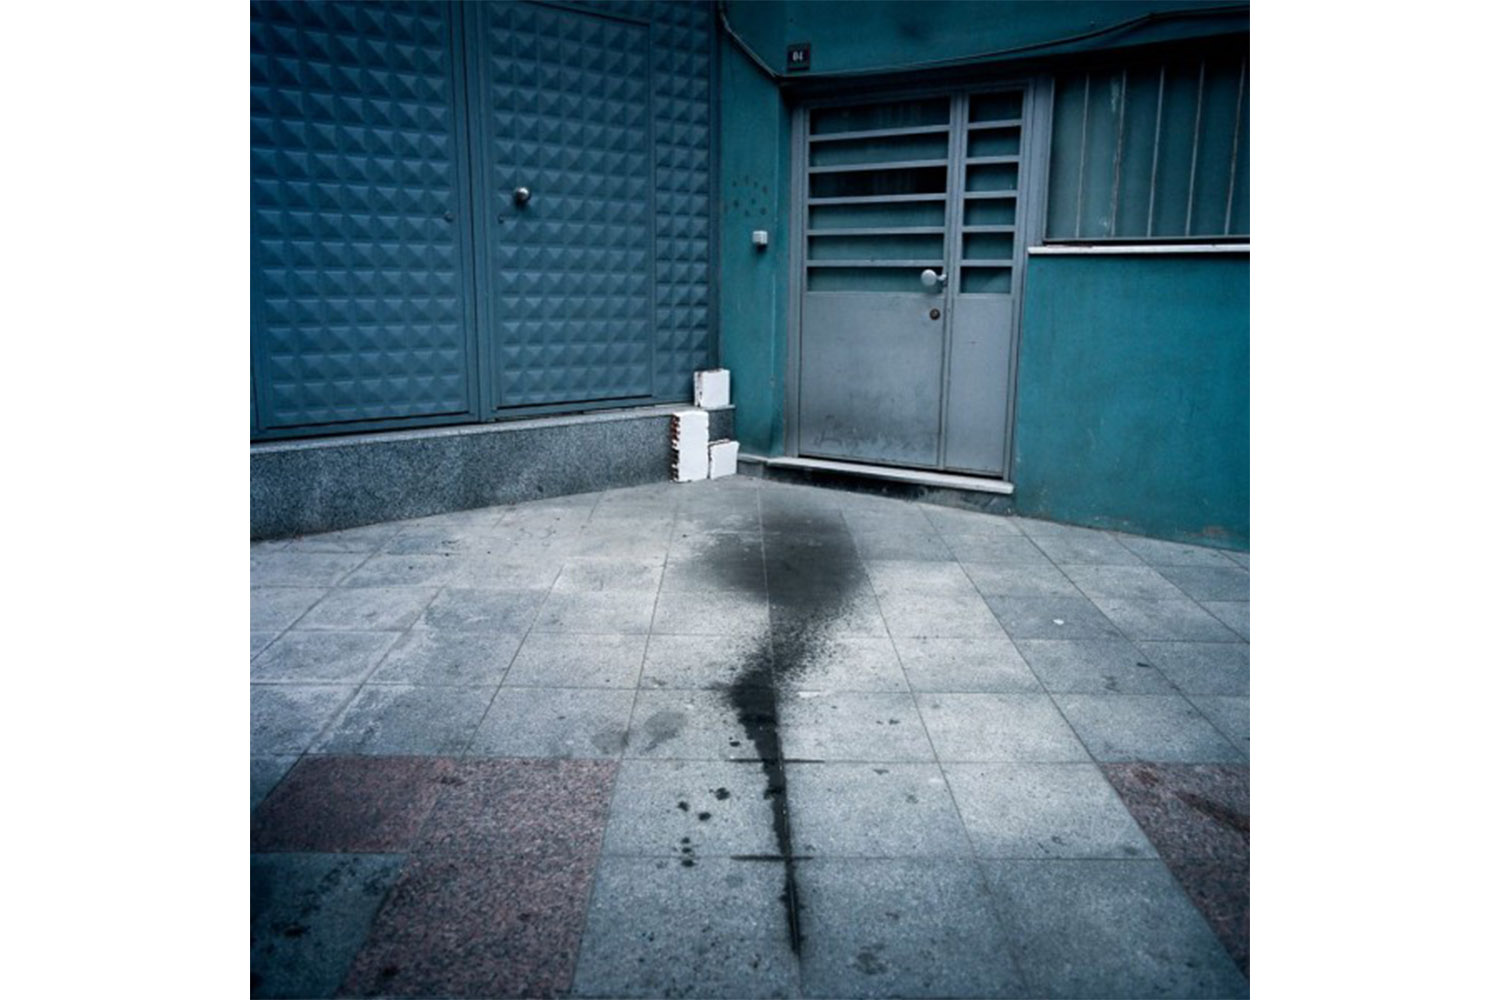 Redeployment_62, from the series ''Nothing Suprising'', 2008